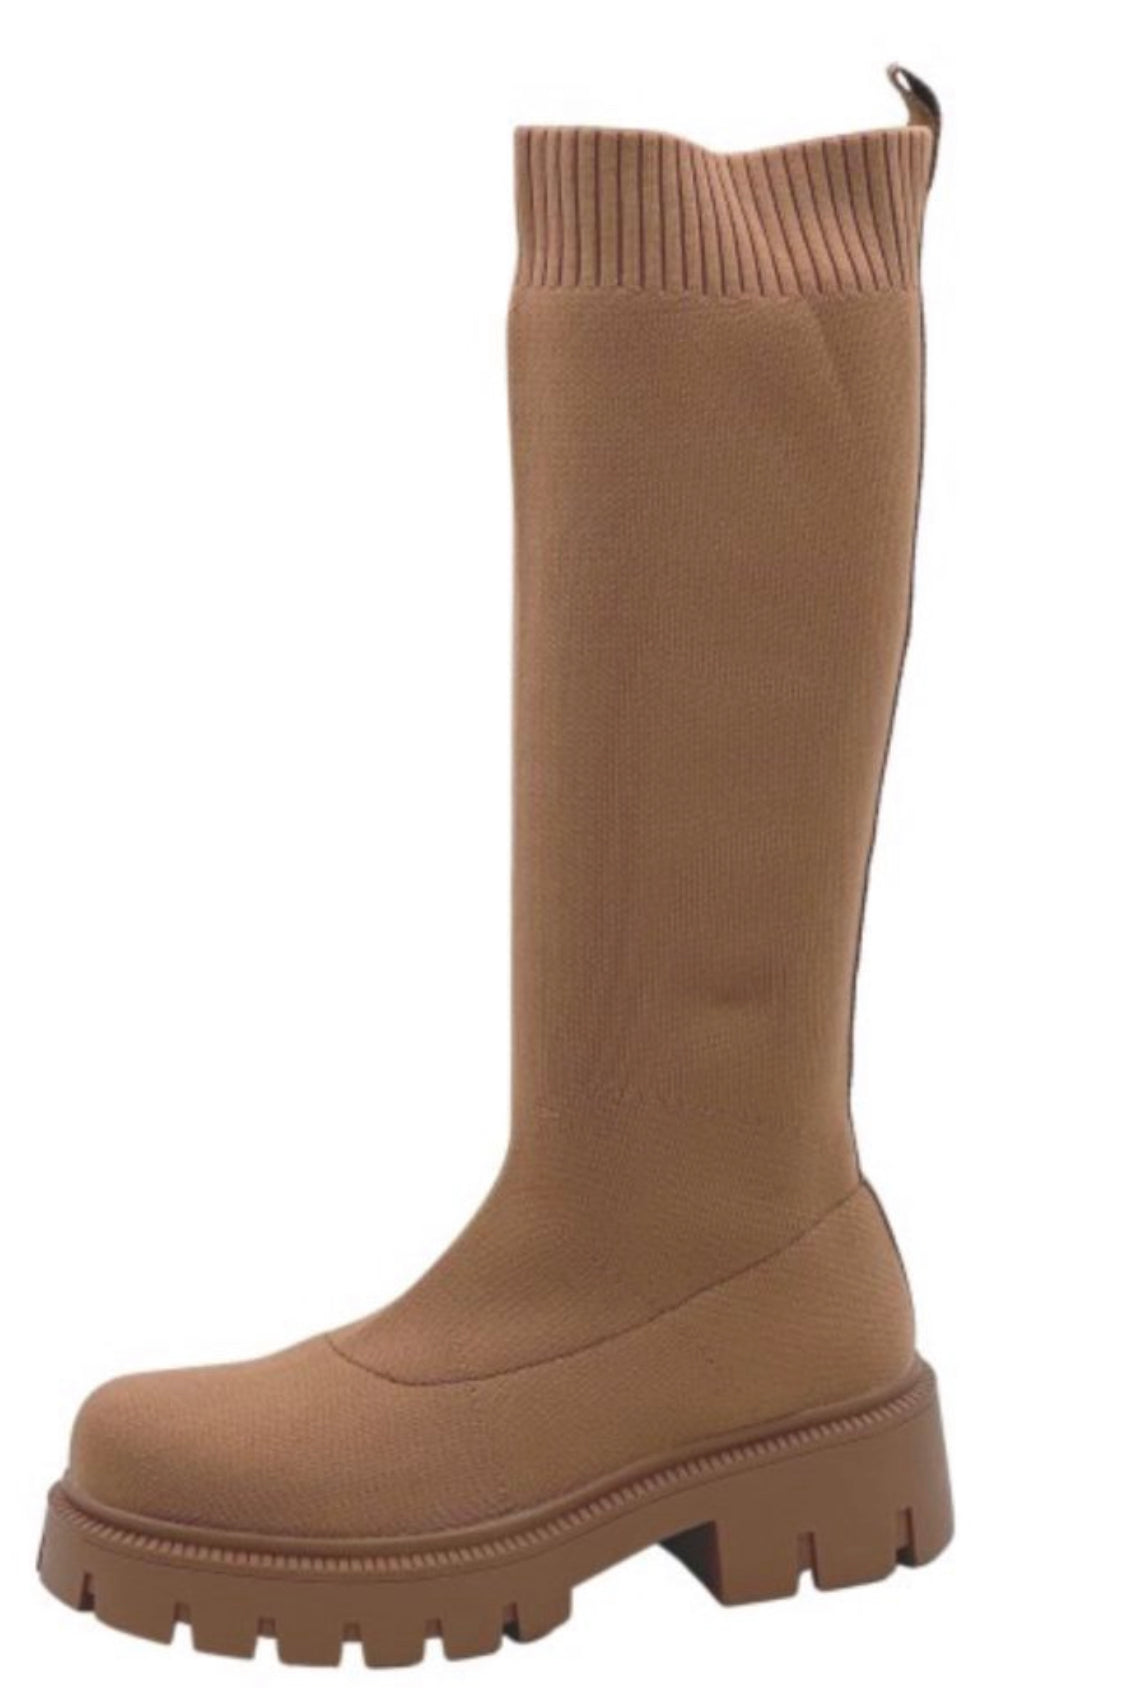 Kensington Sock Boots with Cleated Sole - Camel